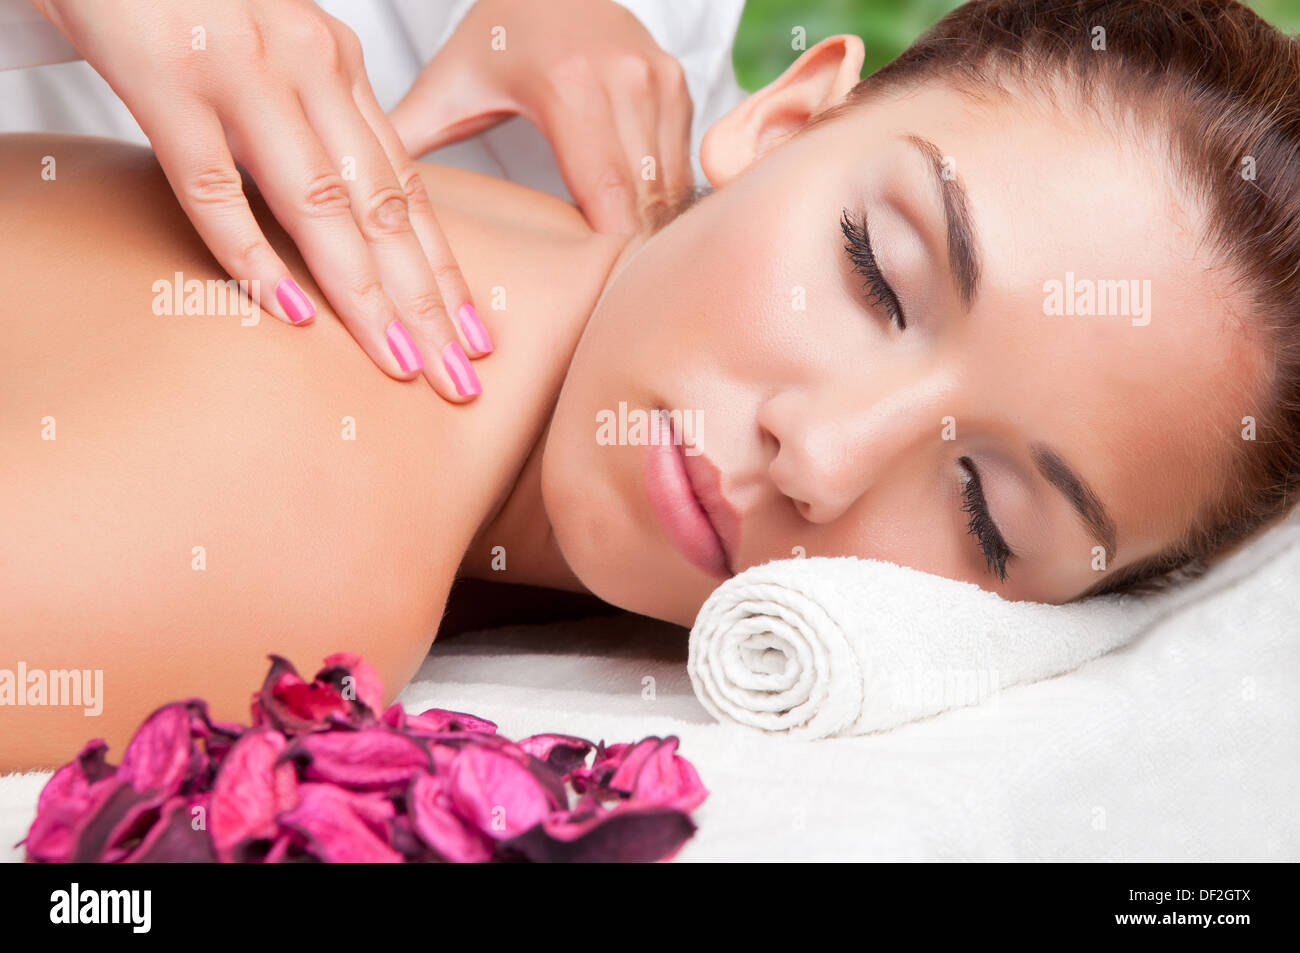 Young woman lying in a spa ready to get a massage Stock Photo